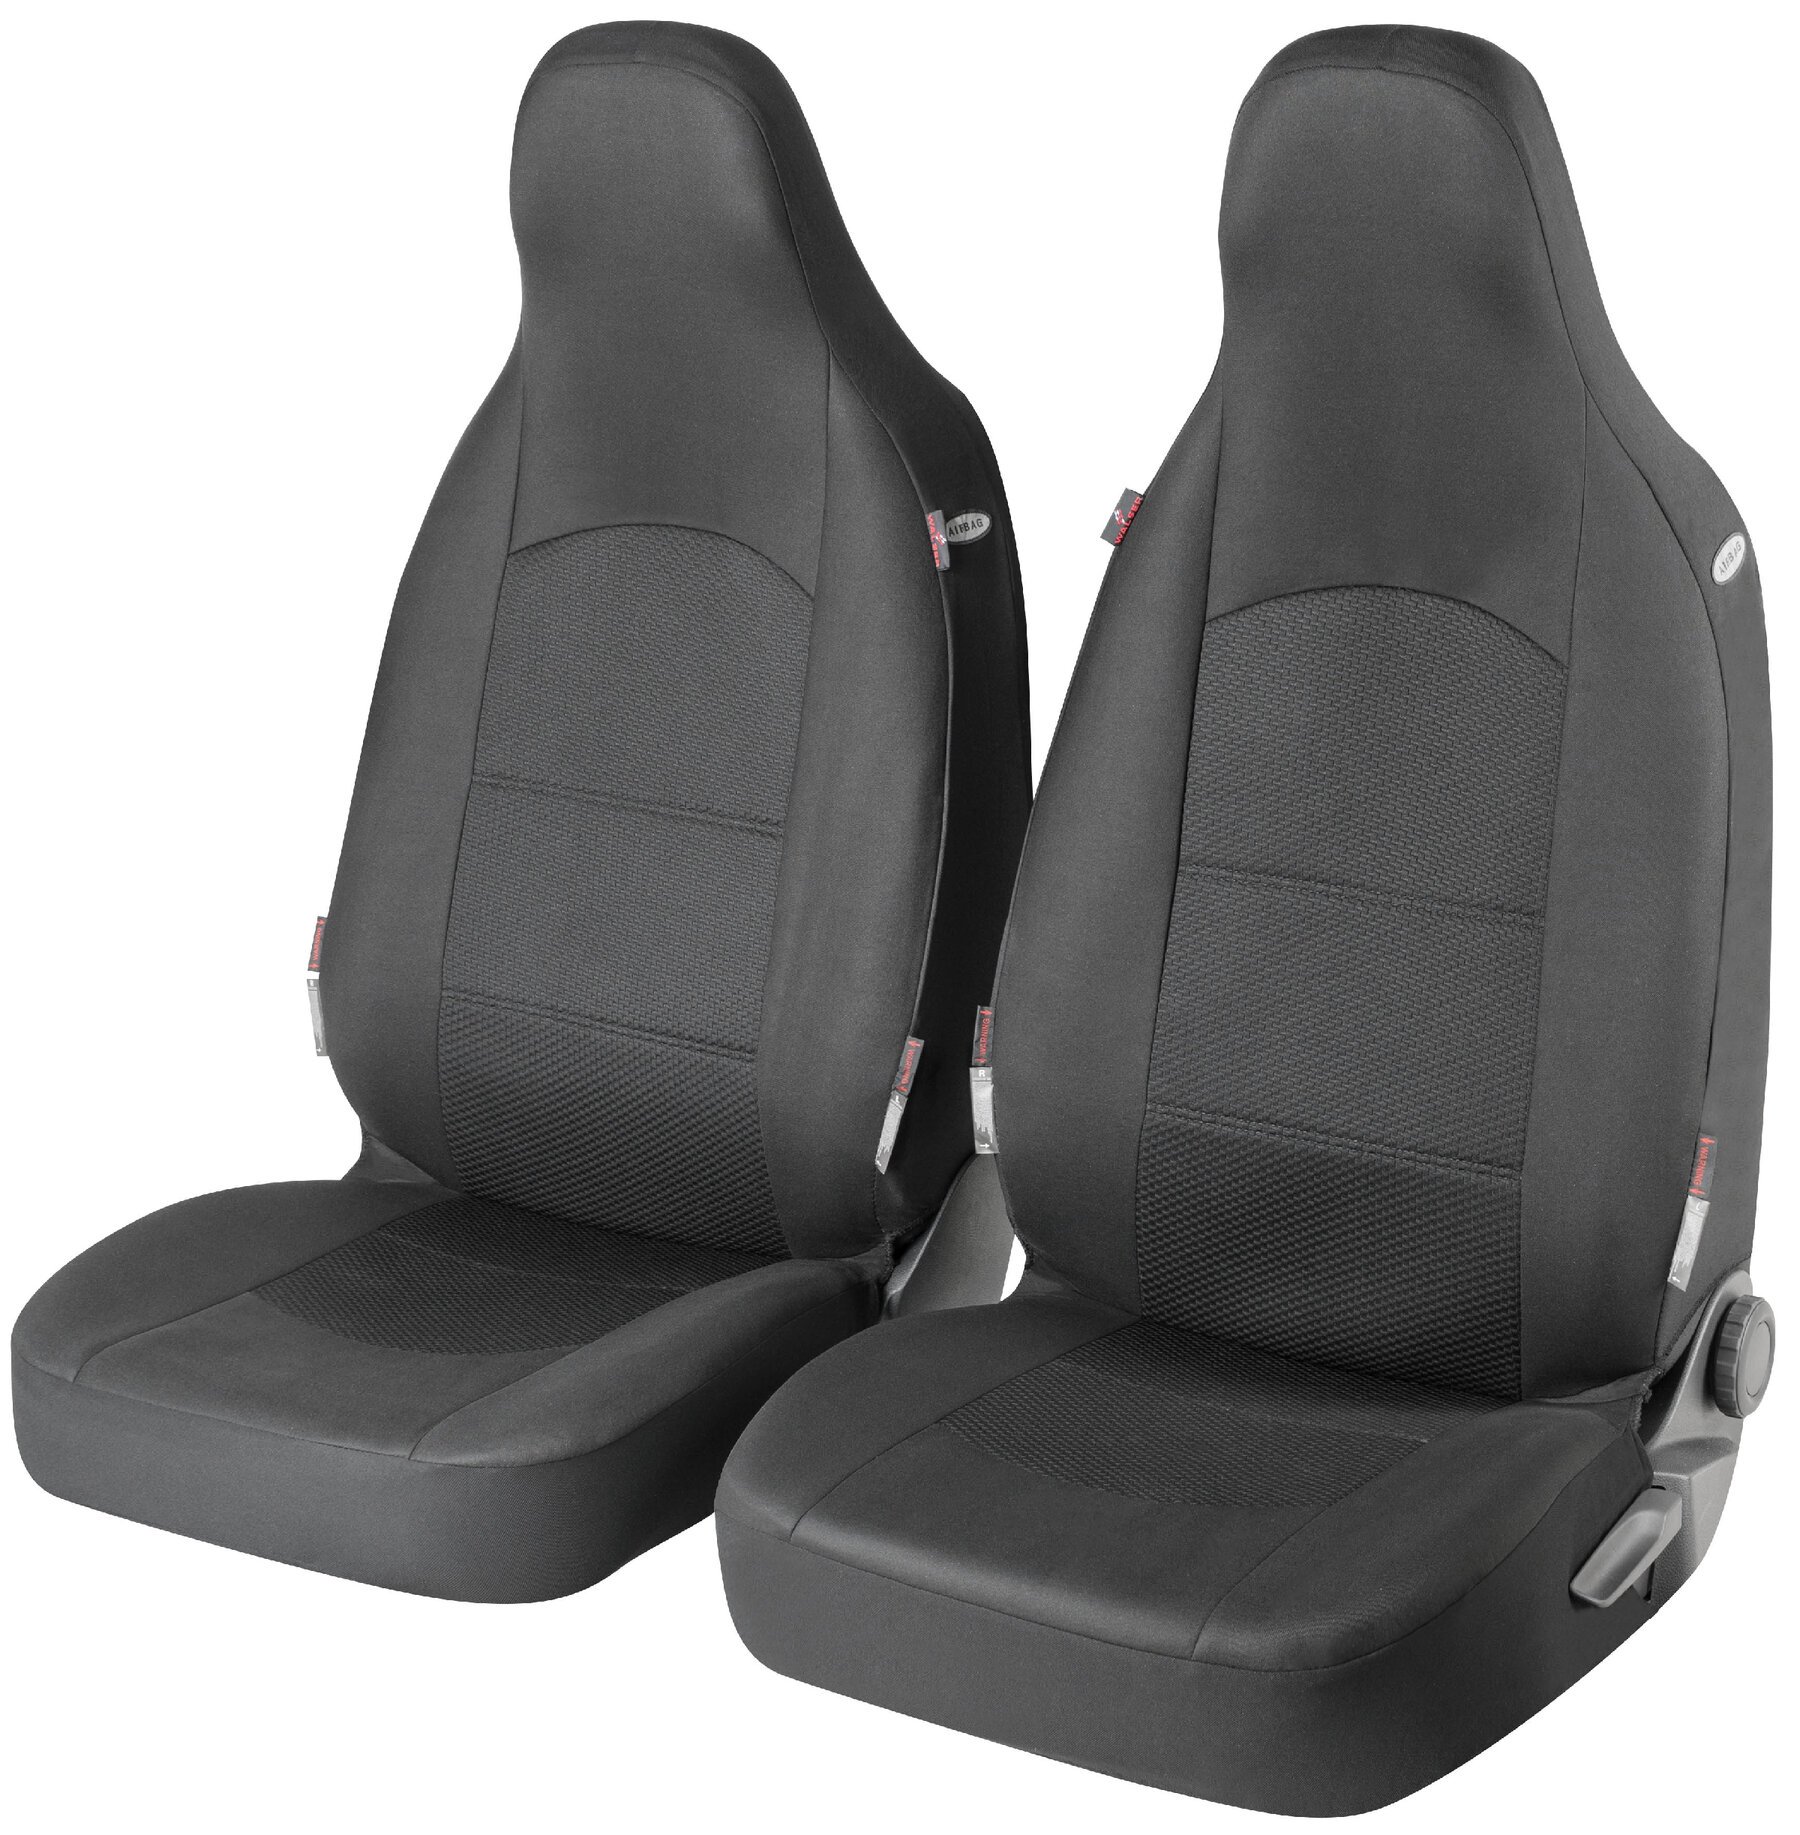 ZIPP IT Premium Derby Car Seat covers for highback front seats with zip system